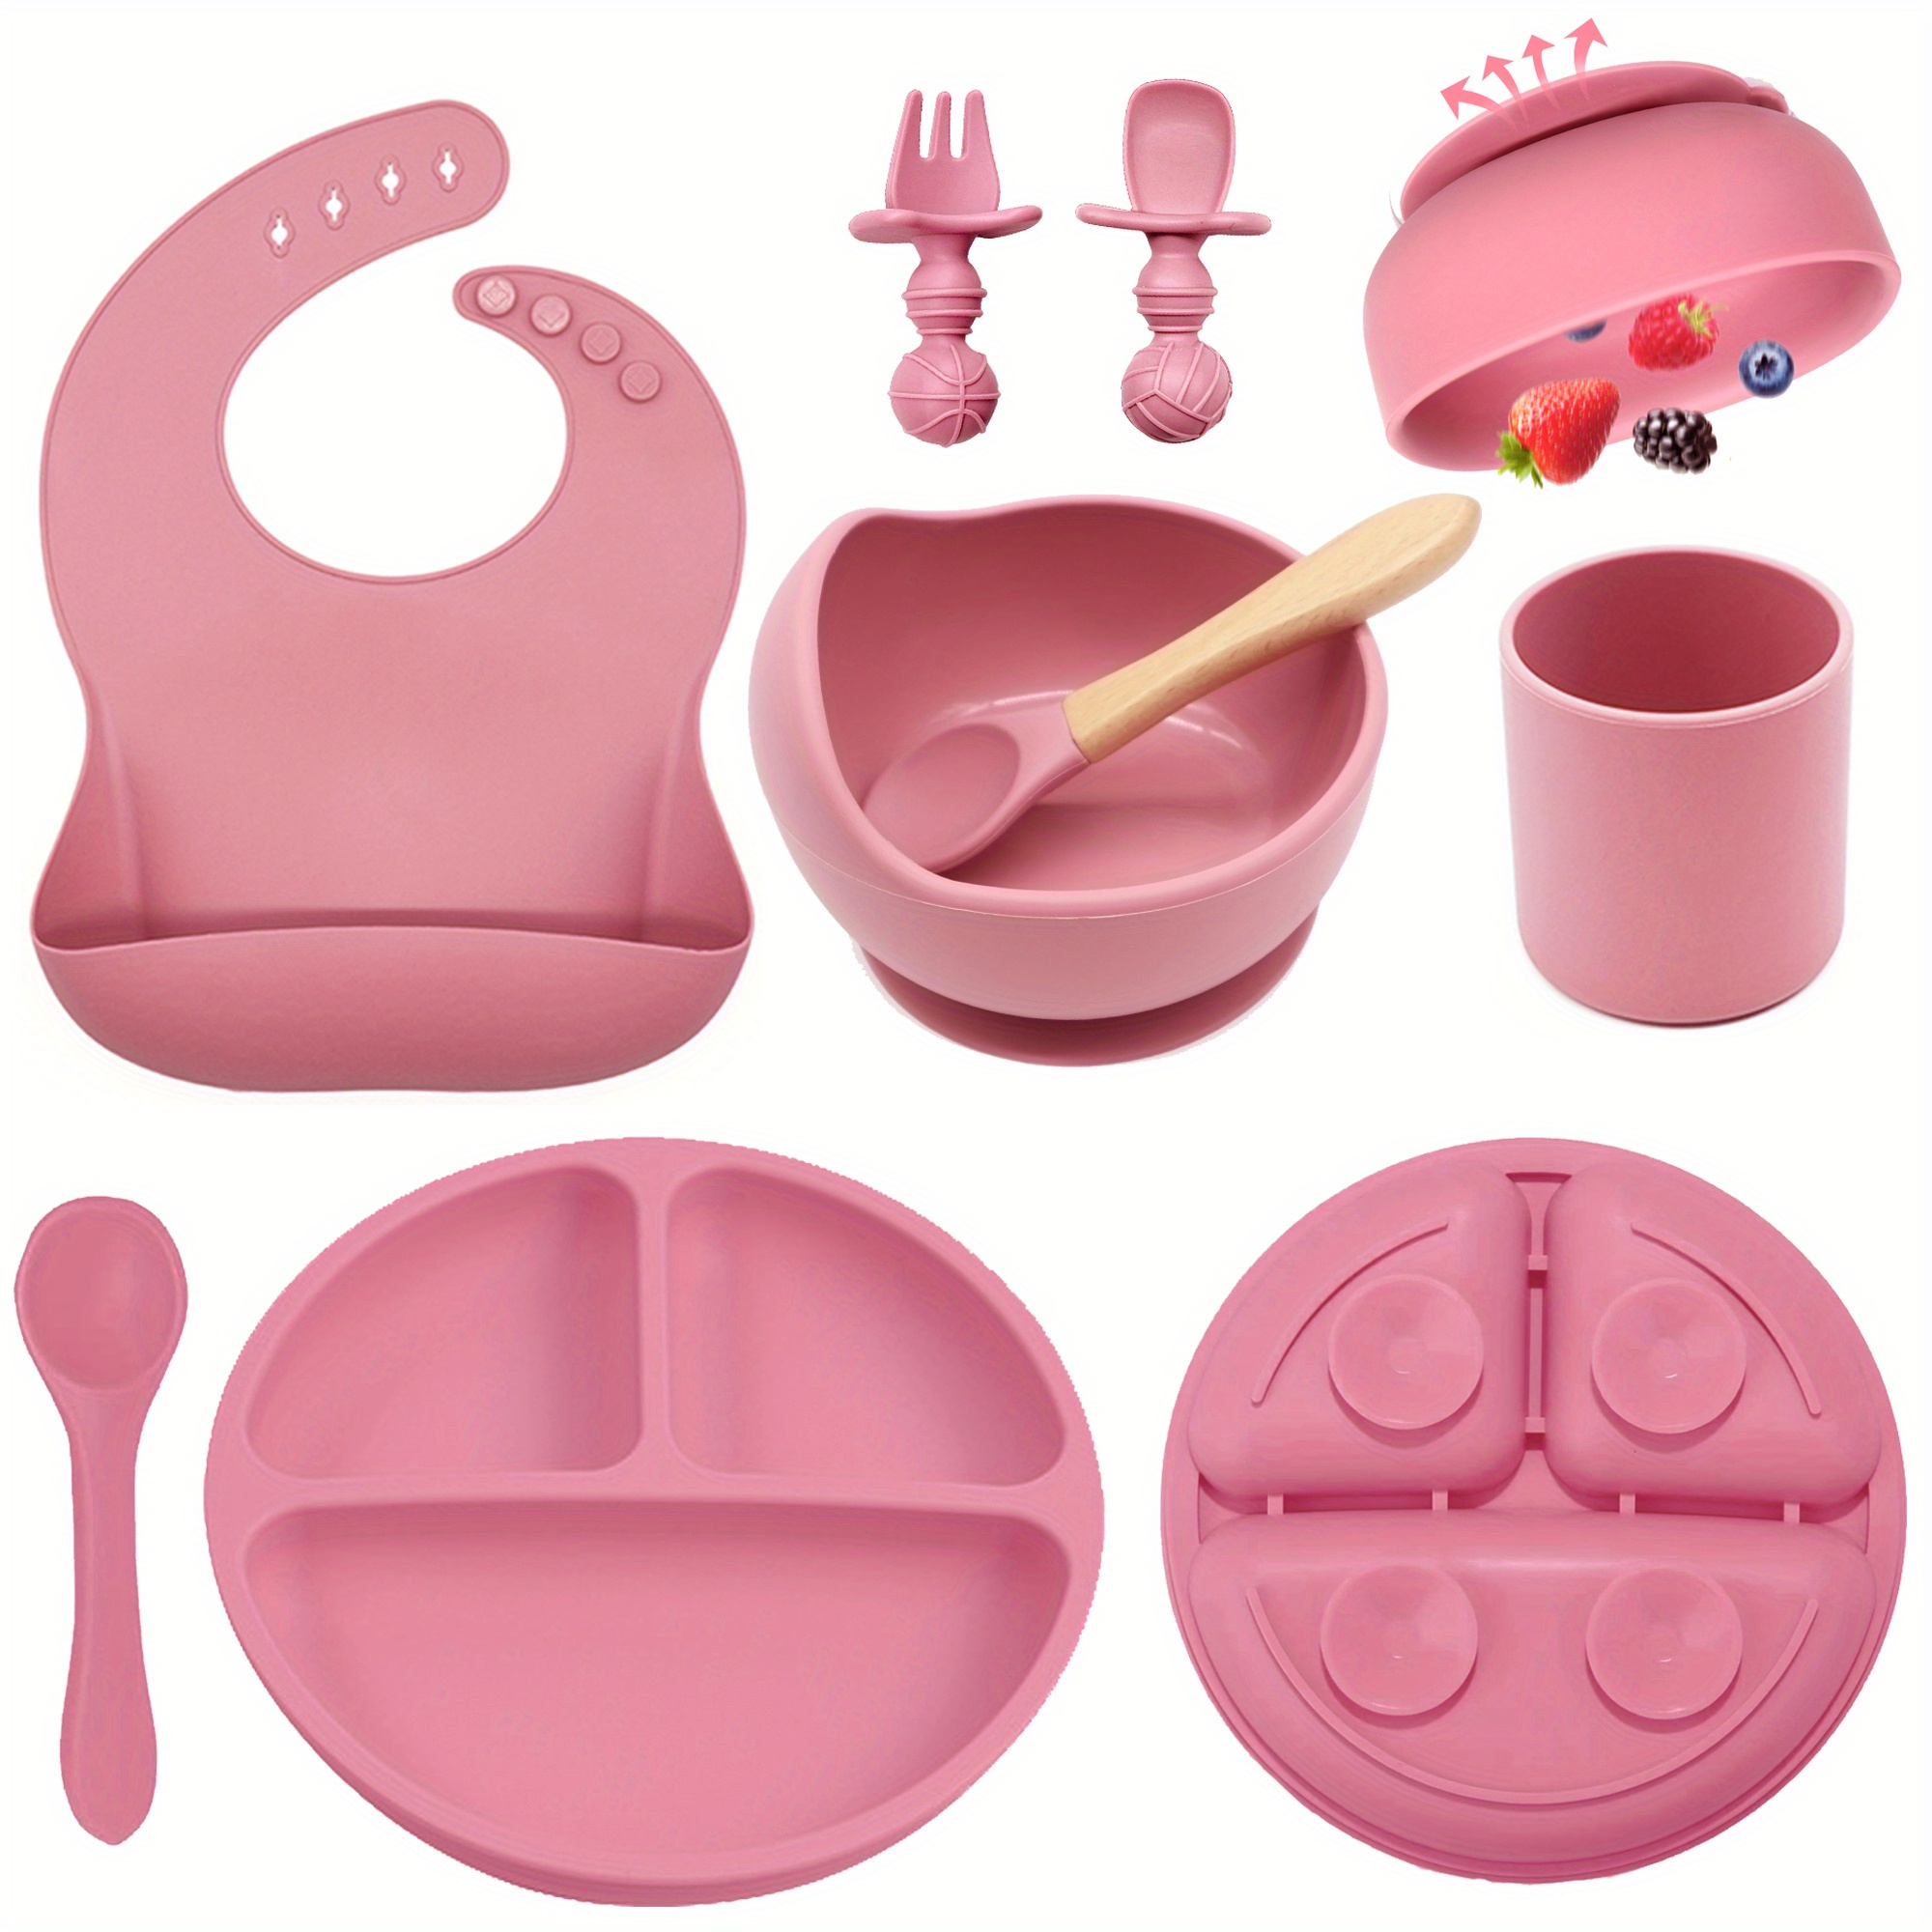 Baby Silicone Cutlery Set Baby Plate Silicone Baby Feeding Set